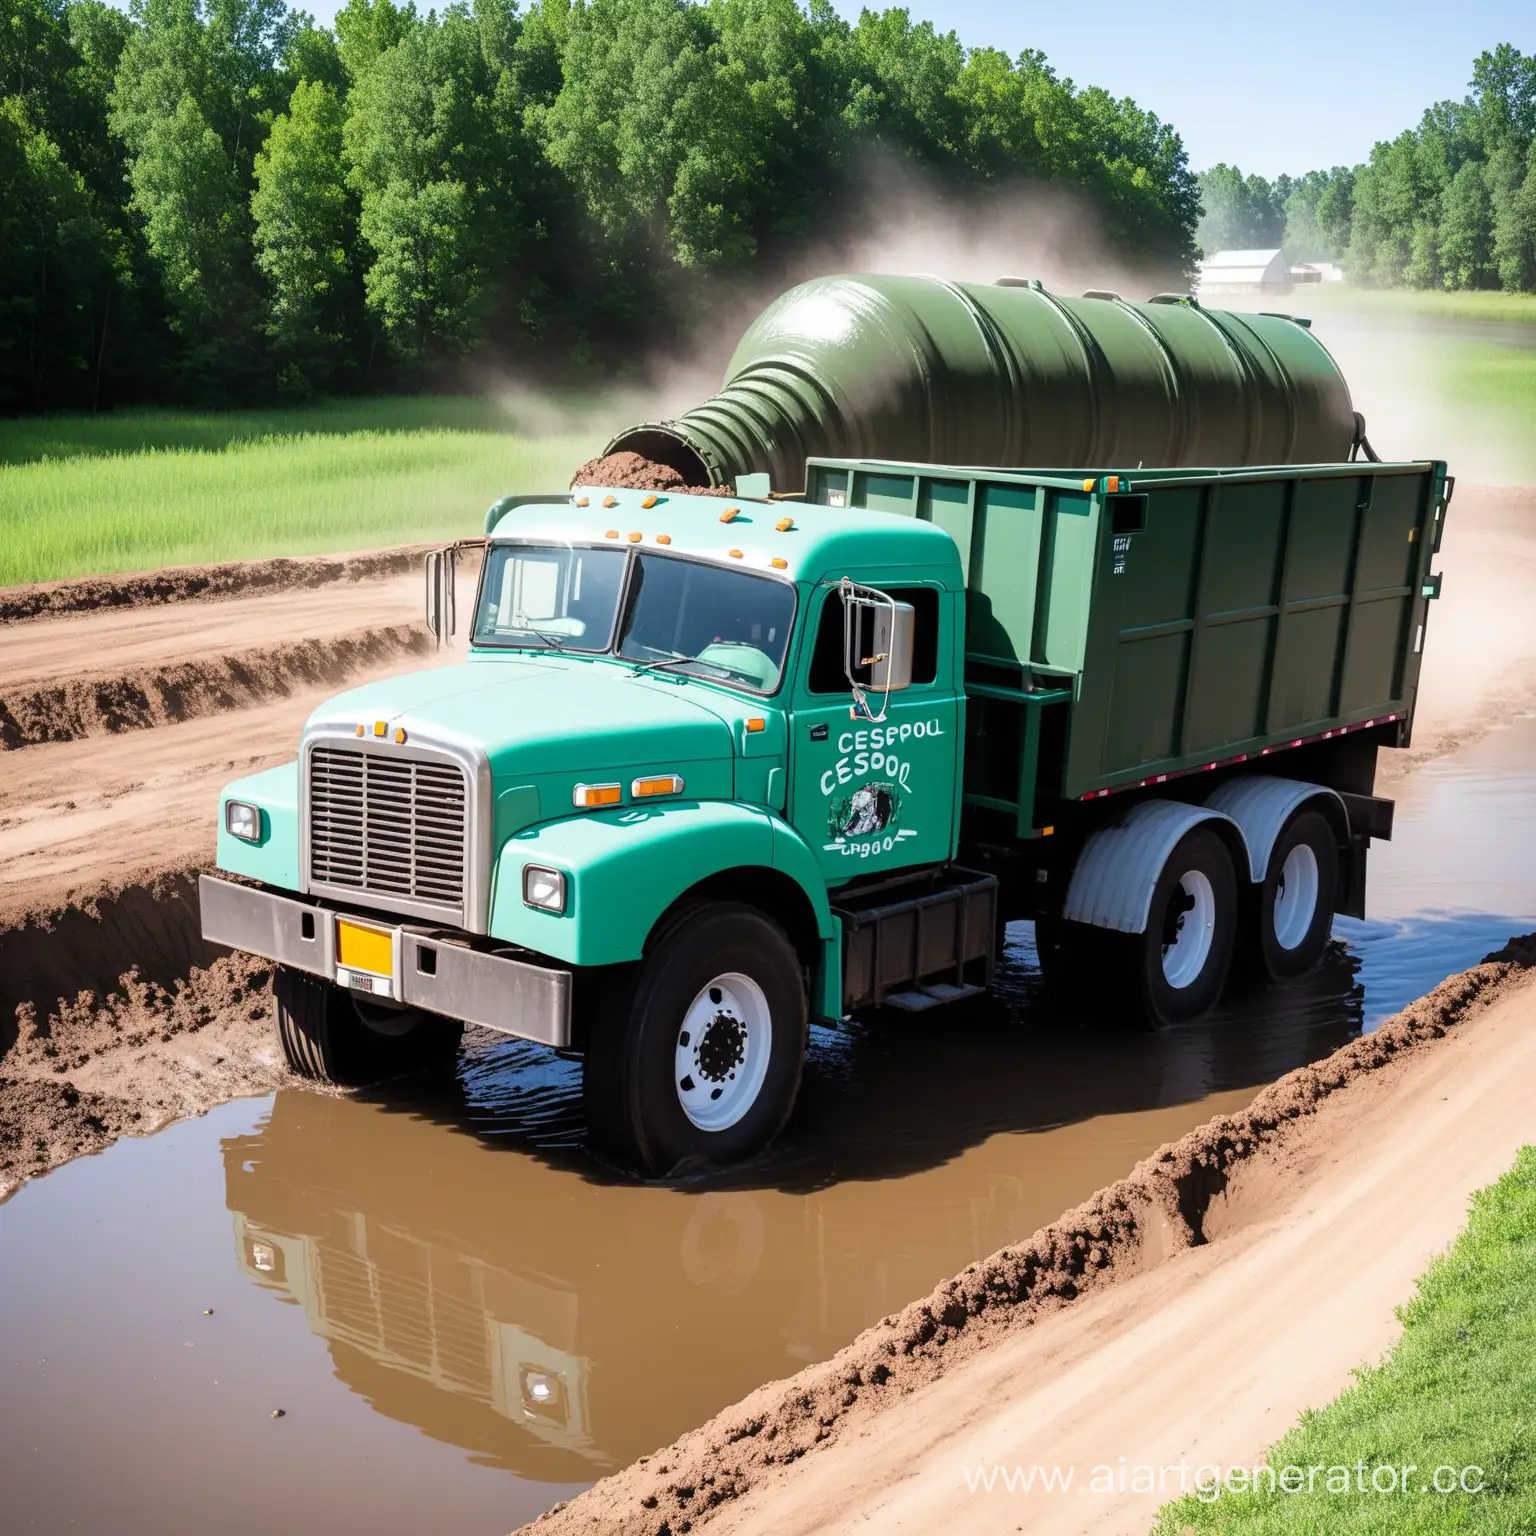 Industrial-Waste-Disposal-Cesspool-Truck-in-Action